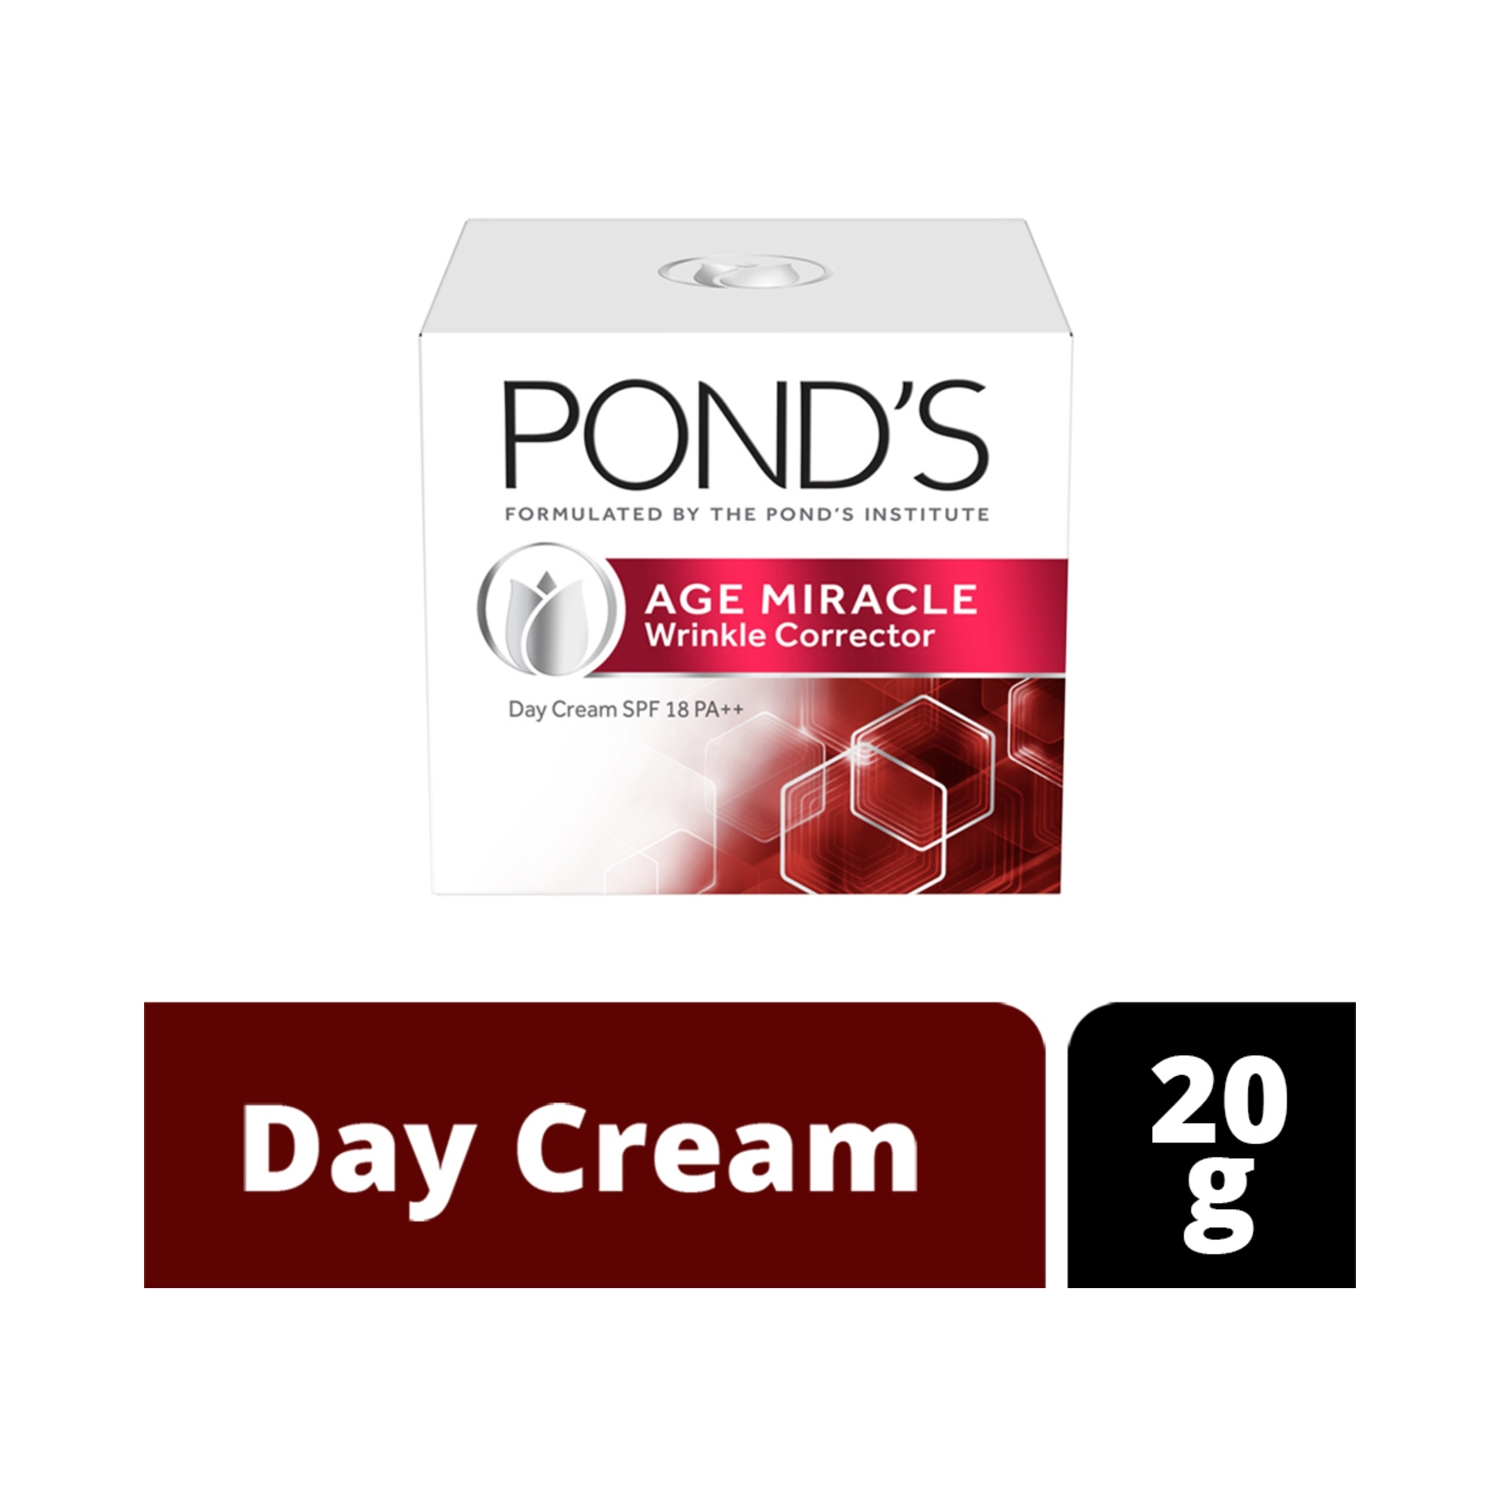 Pond's Age Miracle Youthful Glow Day Cream SPF 15 PA++ (20g)